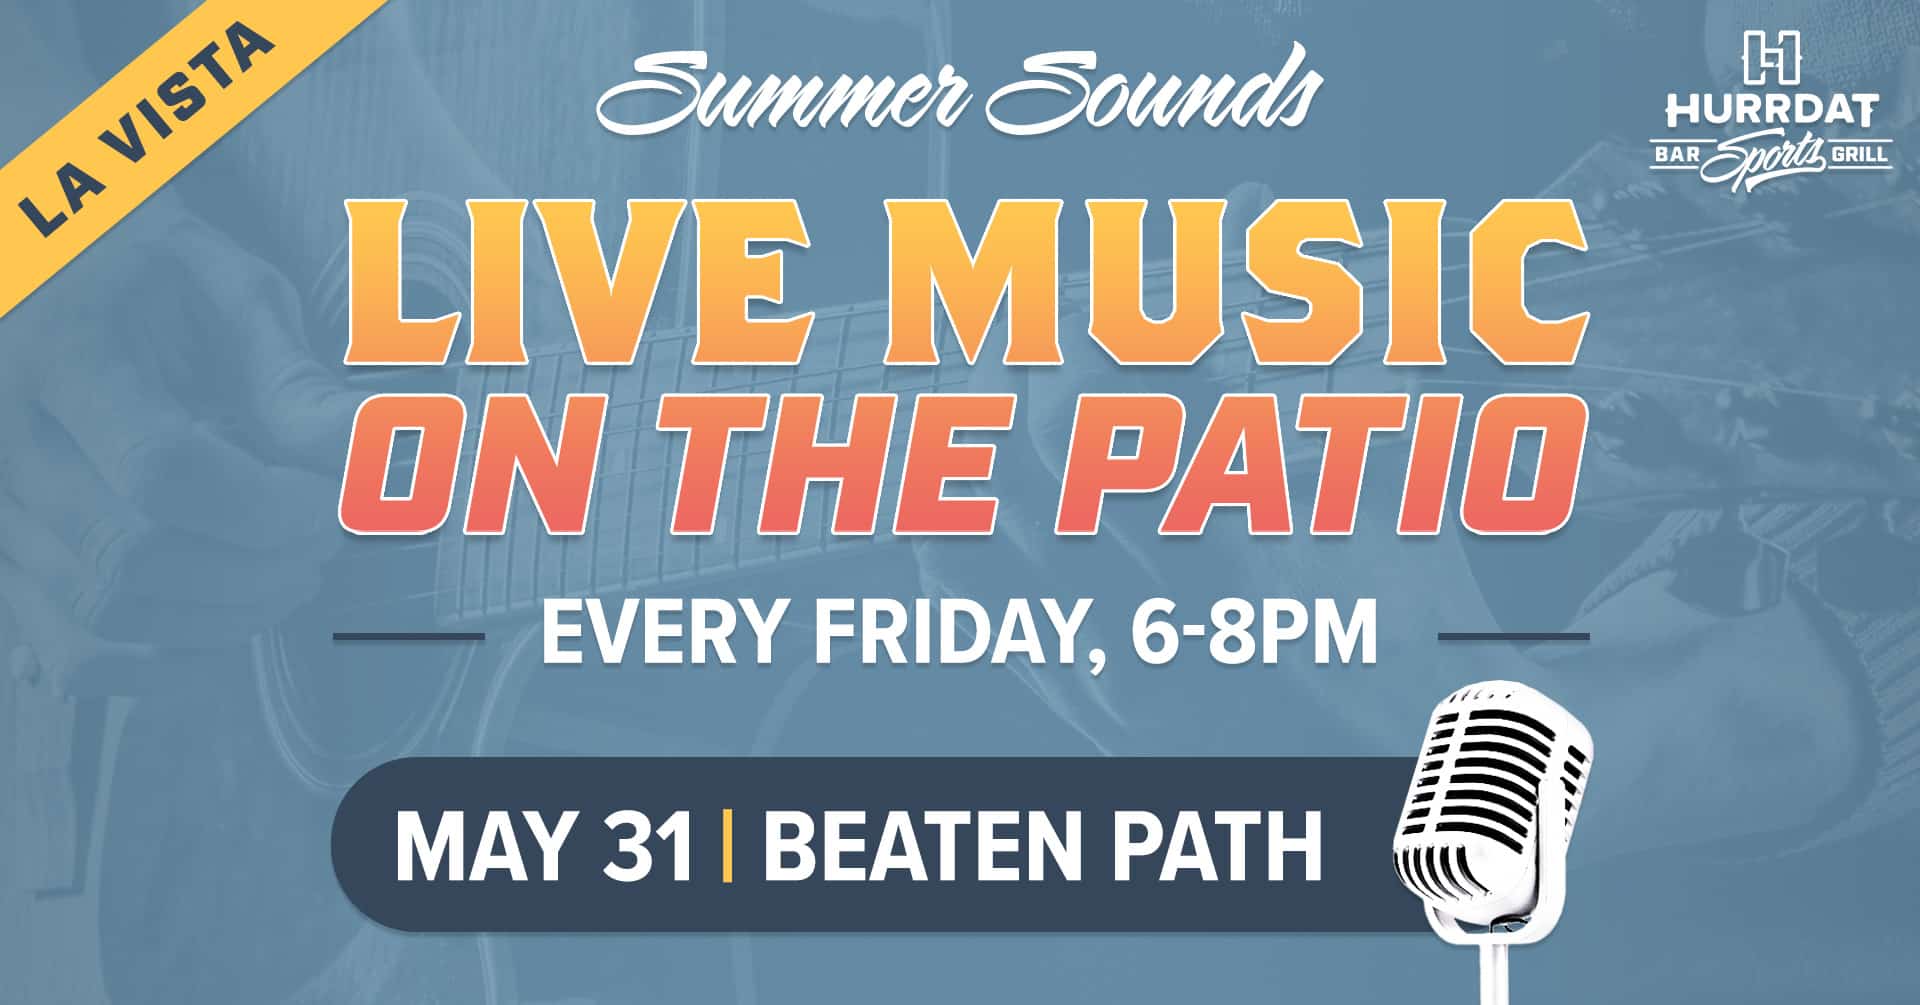 live music summer sounds in la vista with beaten path